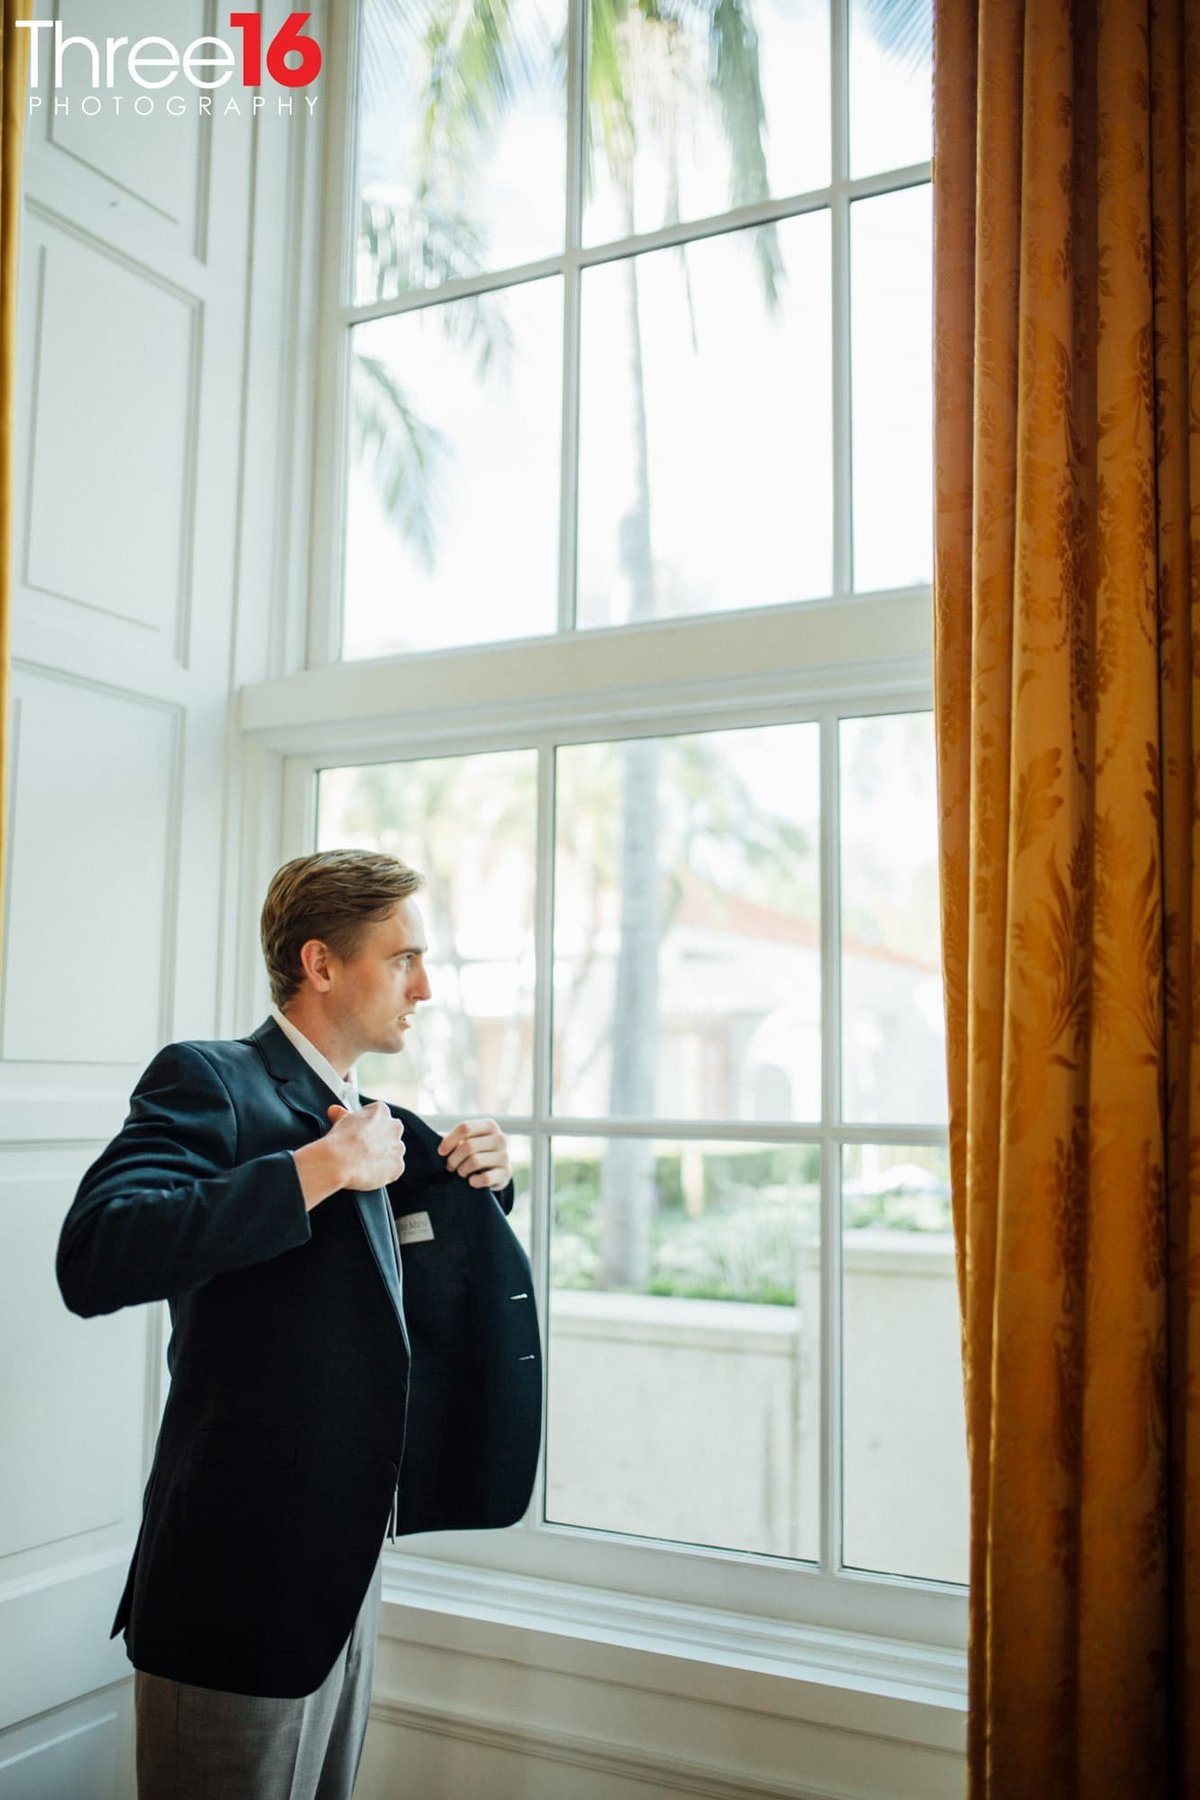 Groom looks out the window as he puts his suit jacket on just prior to the wedding ceremony